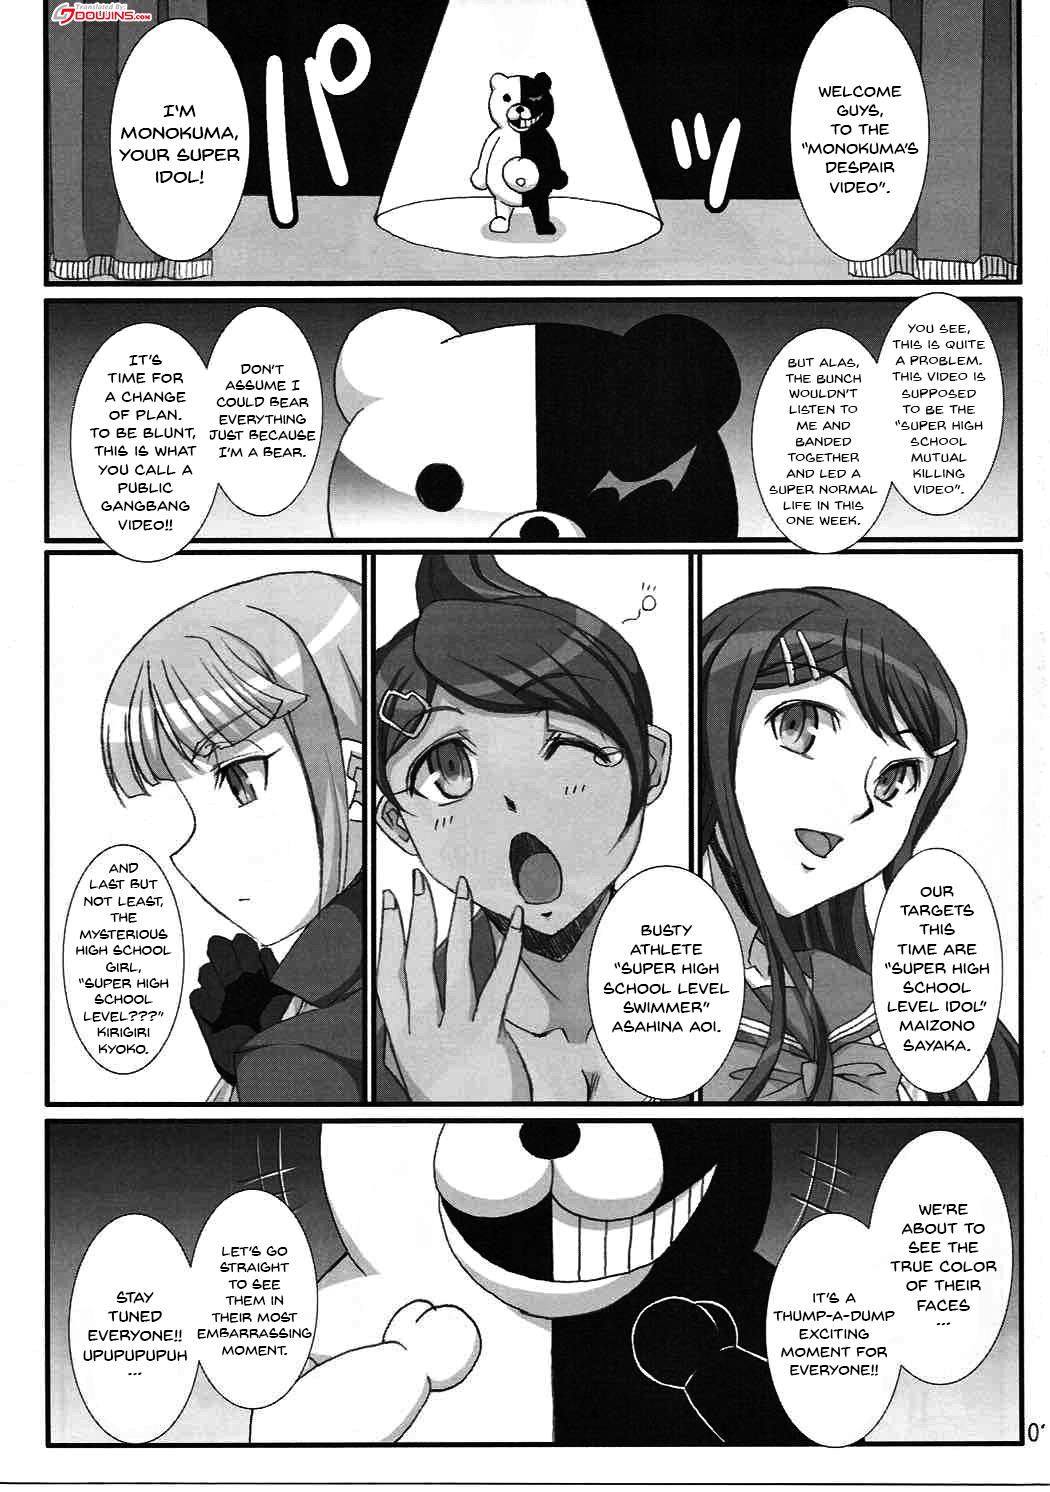 Chastity Youkoso Zetsubou Douga | Welcome To The Despair Video - Danganronpa Amateur - Page 2